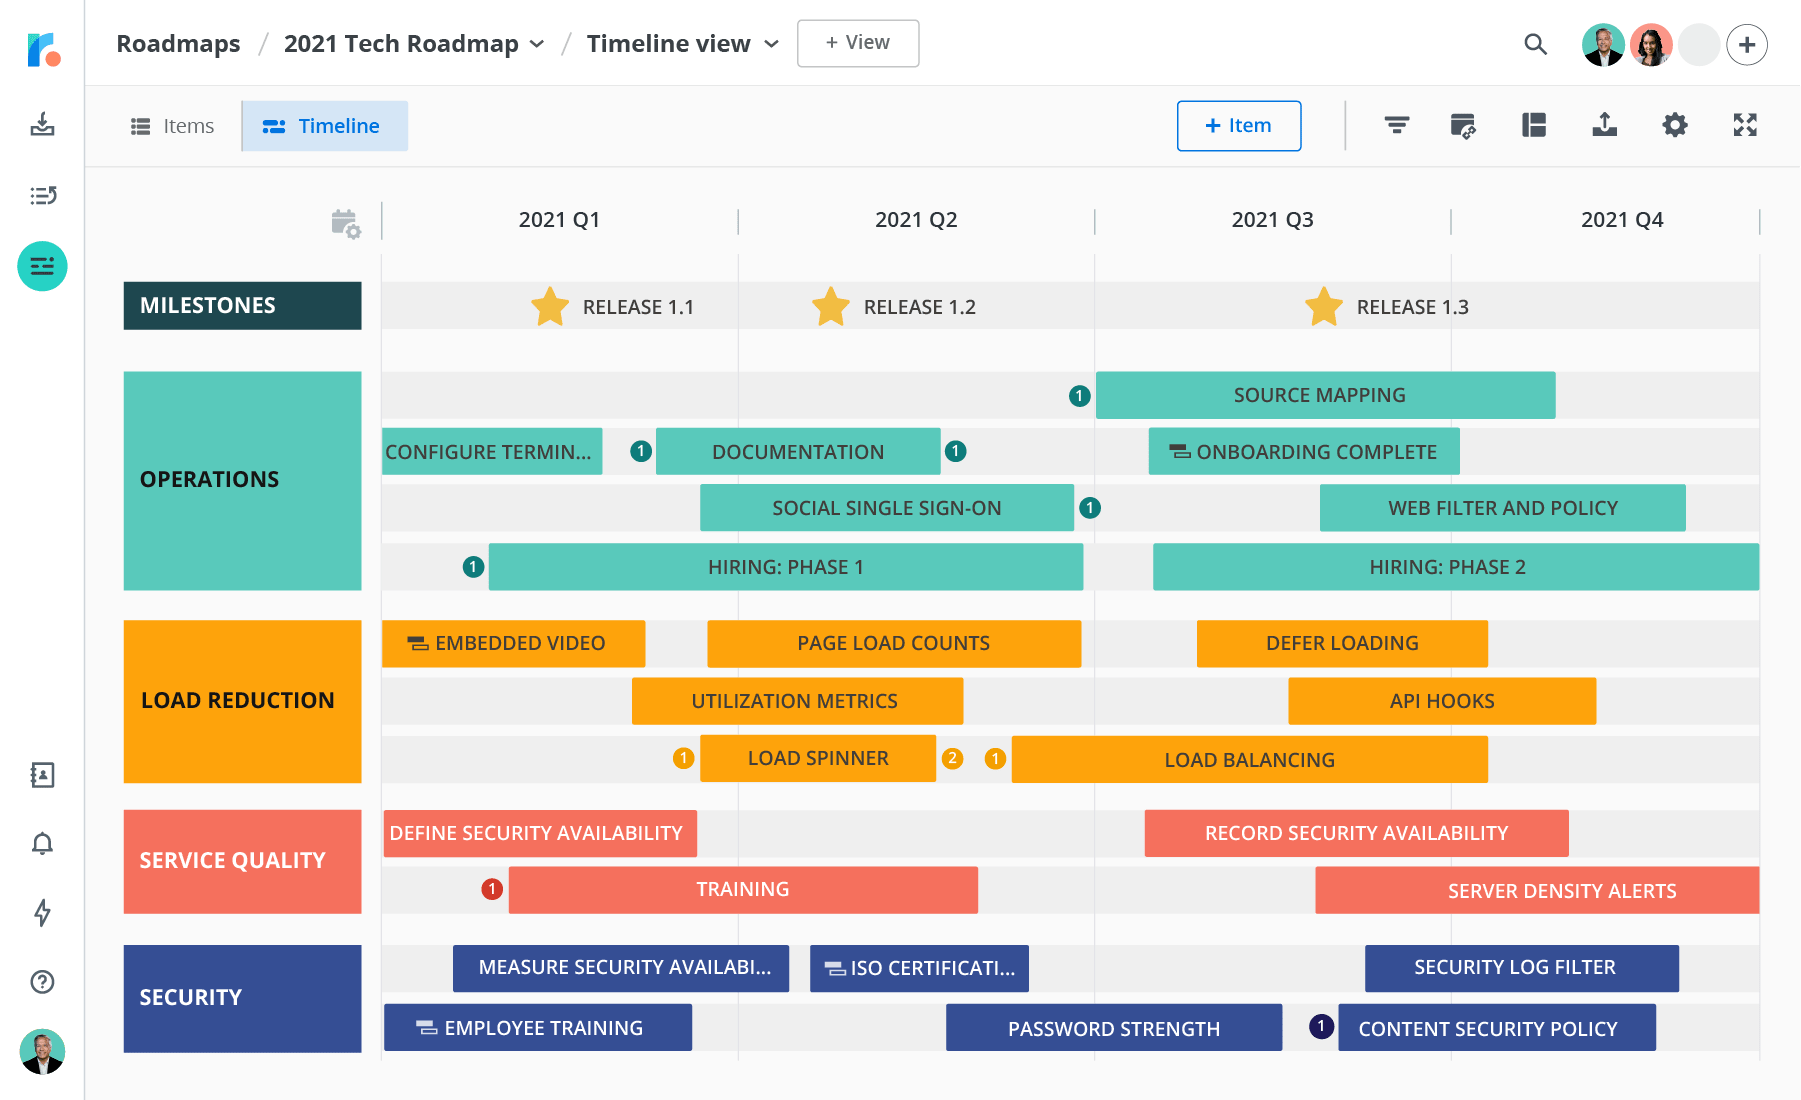 a roadmap showing tasks organized by operations, load reduction, service quality and security over a timeline.